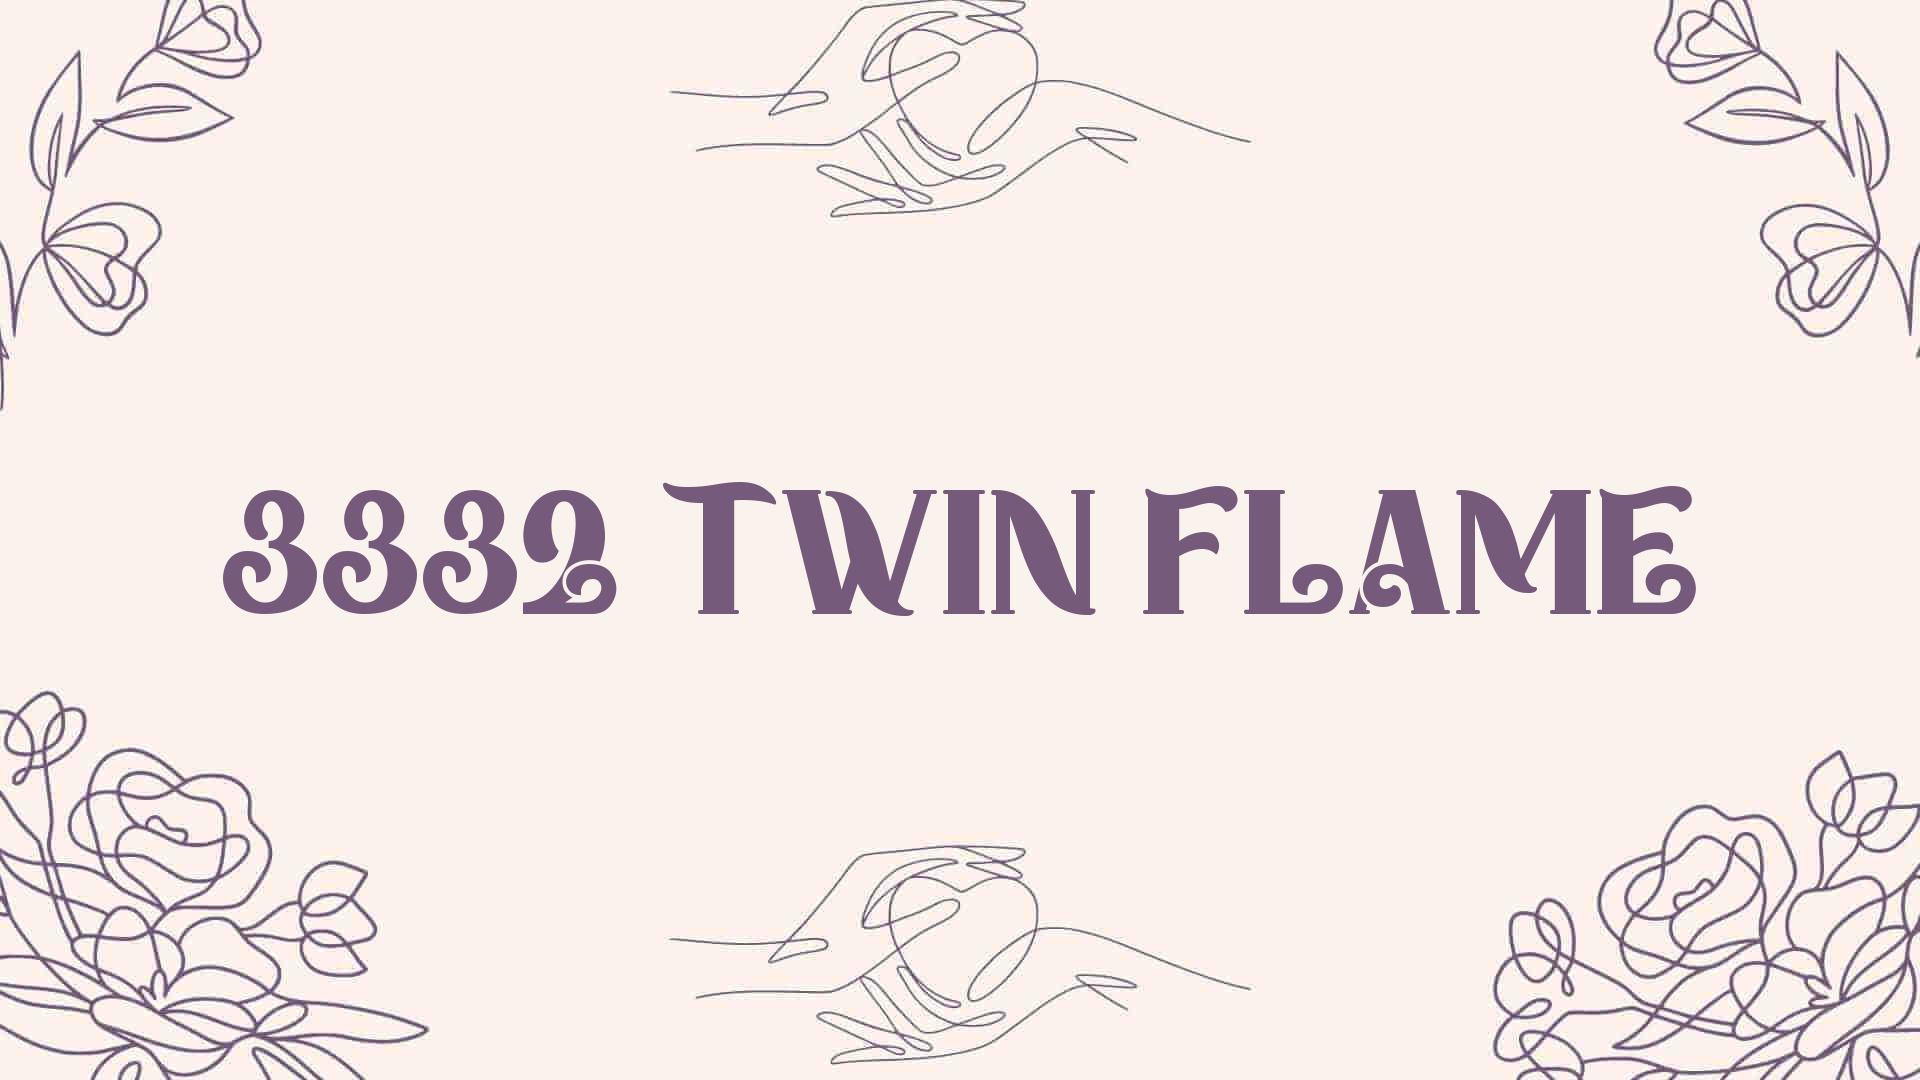 3332 twin flame [ Meaning Revealed ]